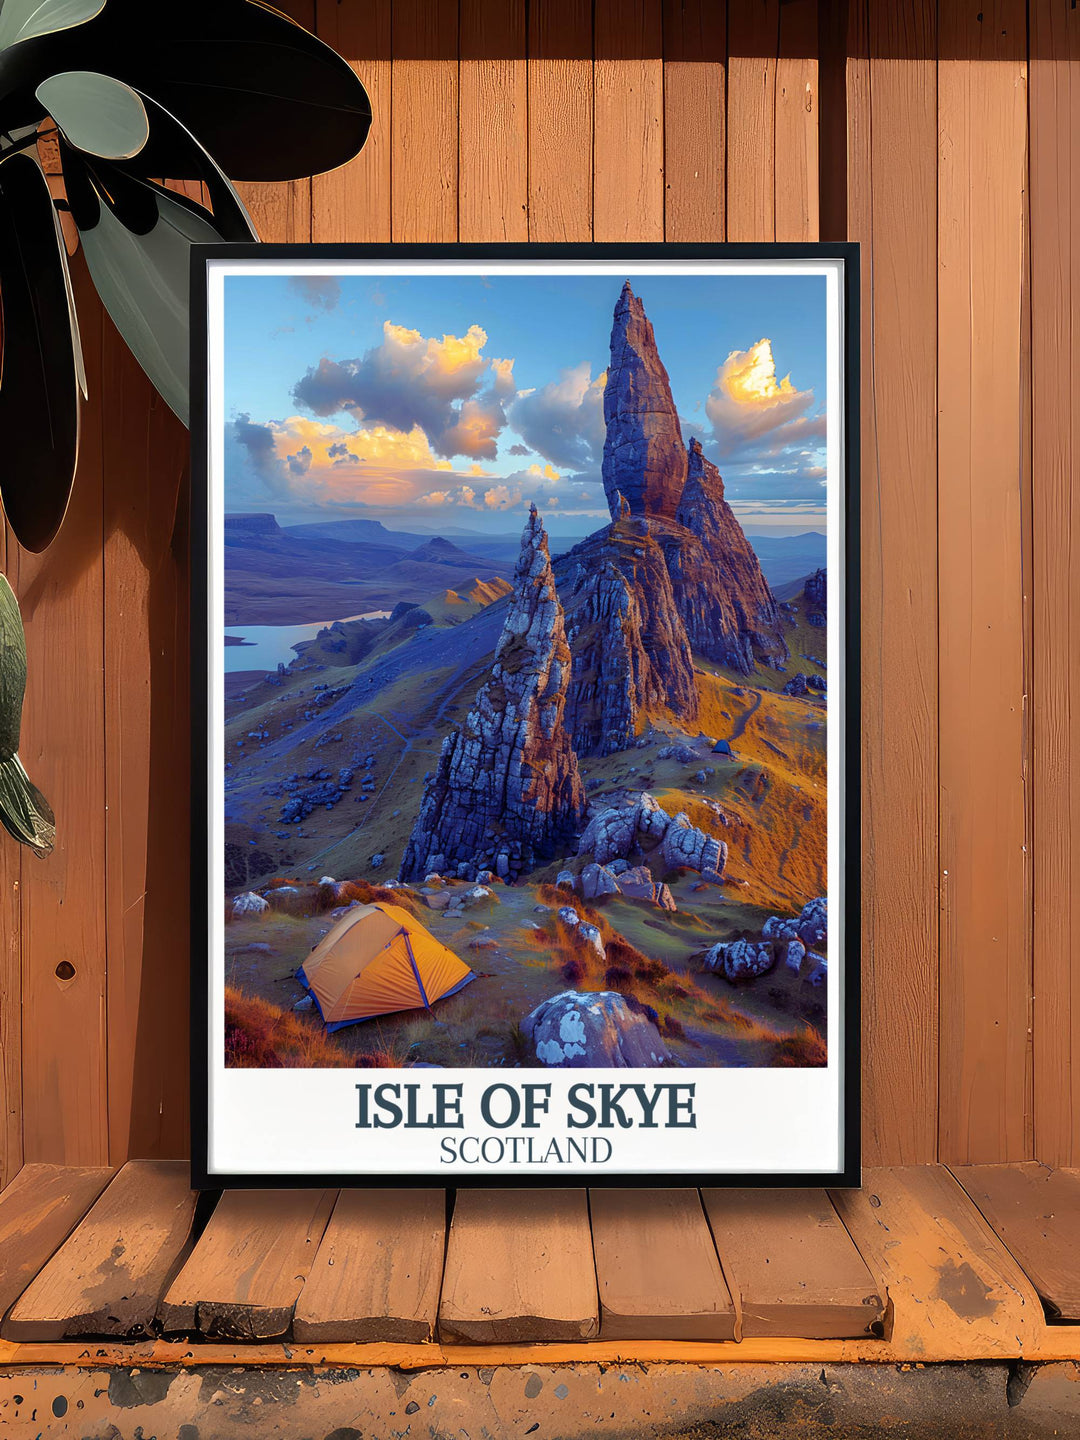 Home decor print featuring The Old Man of Storr as a centerpiece of Scottish heritage and natural beauty